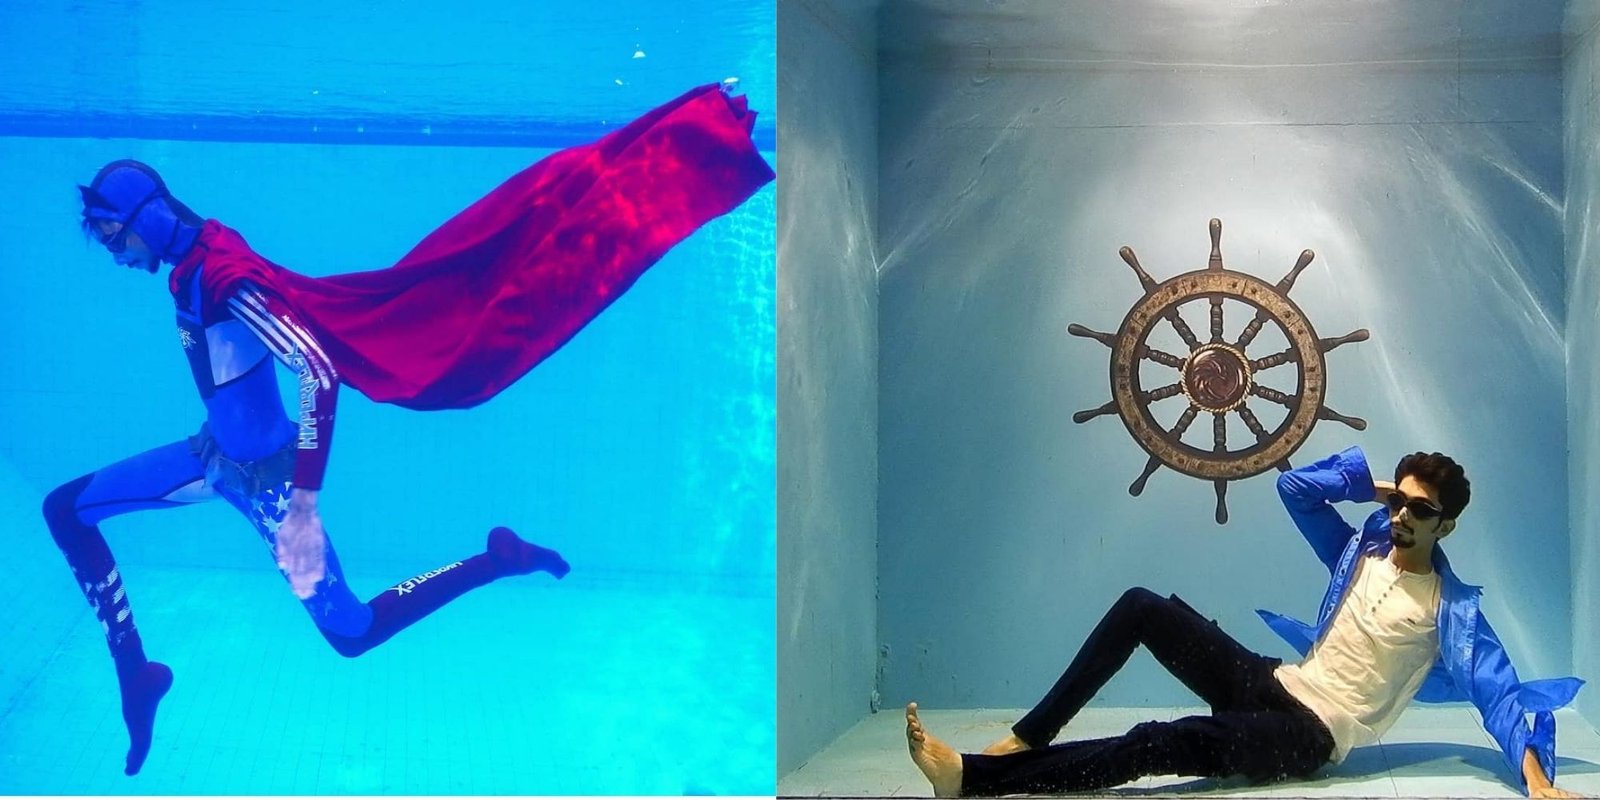 Hydroman – World’s First Underwater Dancer Is Making People Go ‘Wow’ With His Breathtaking Art